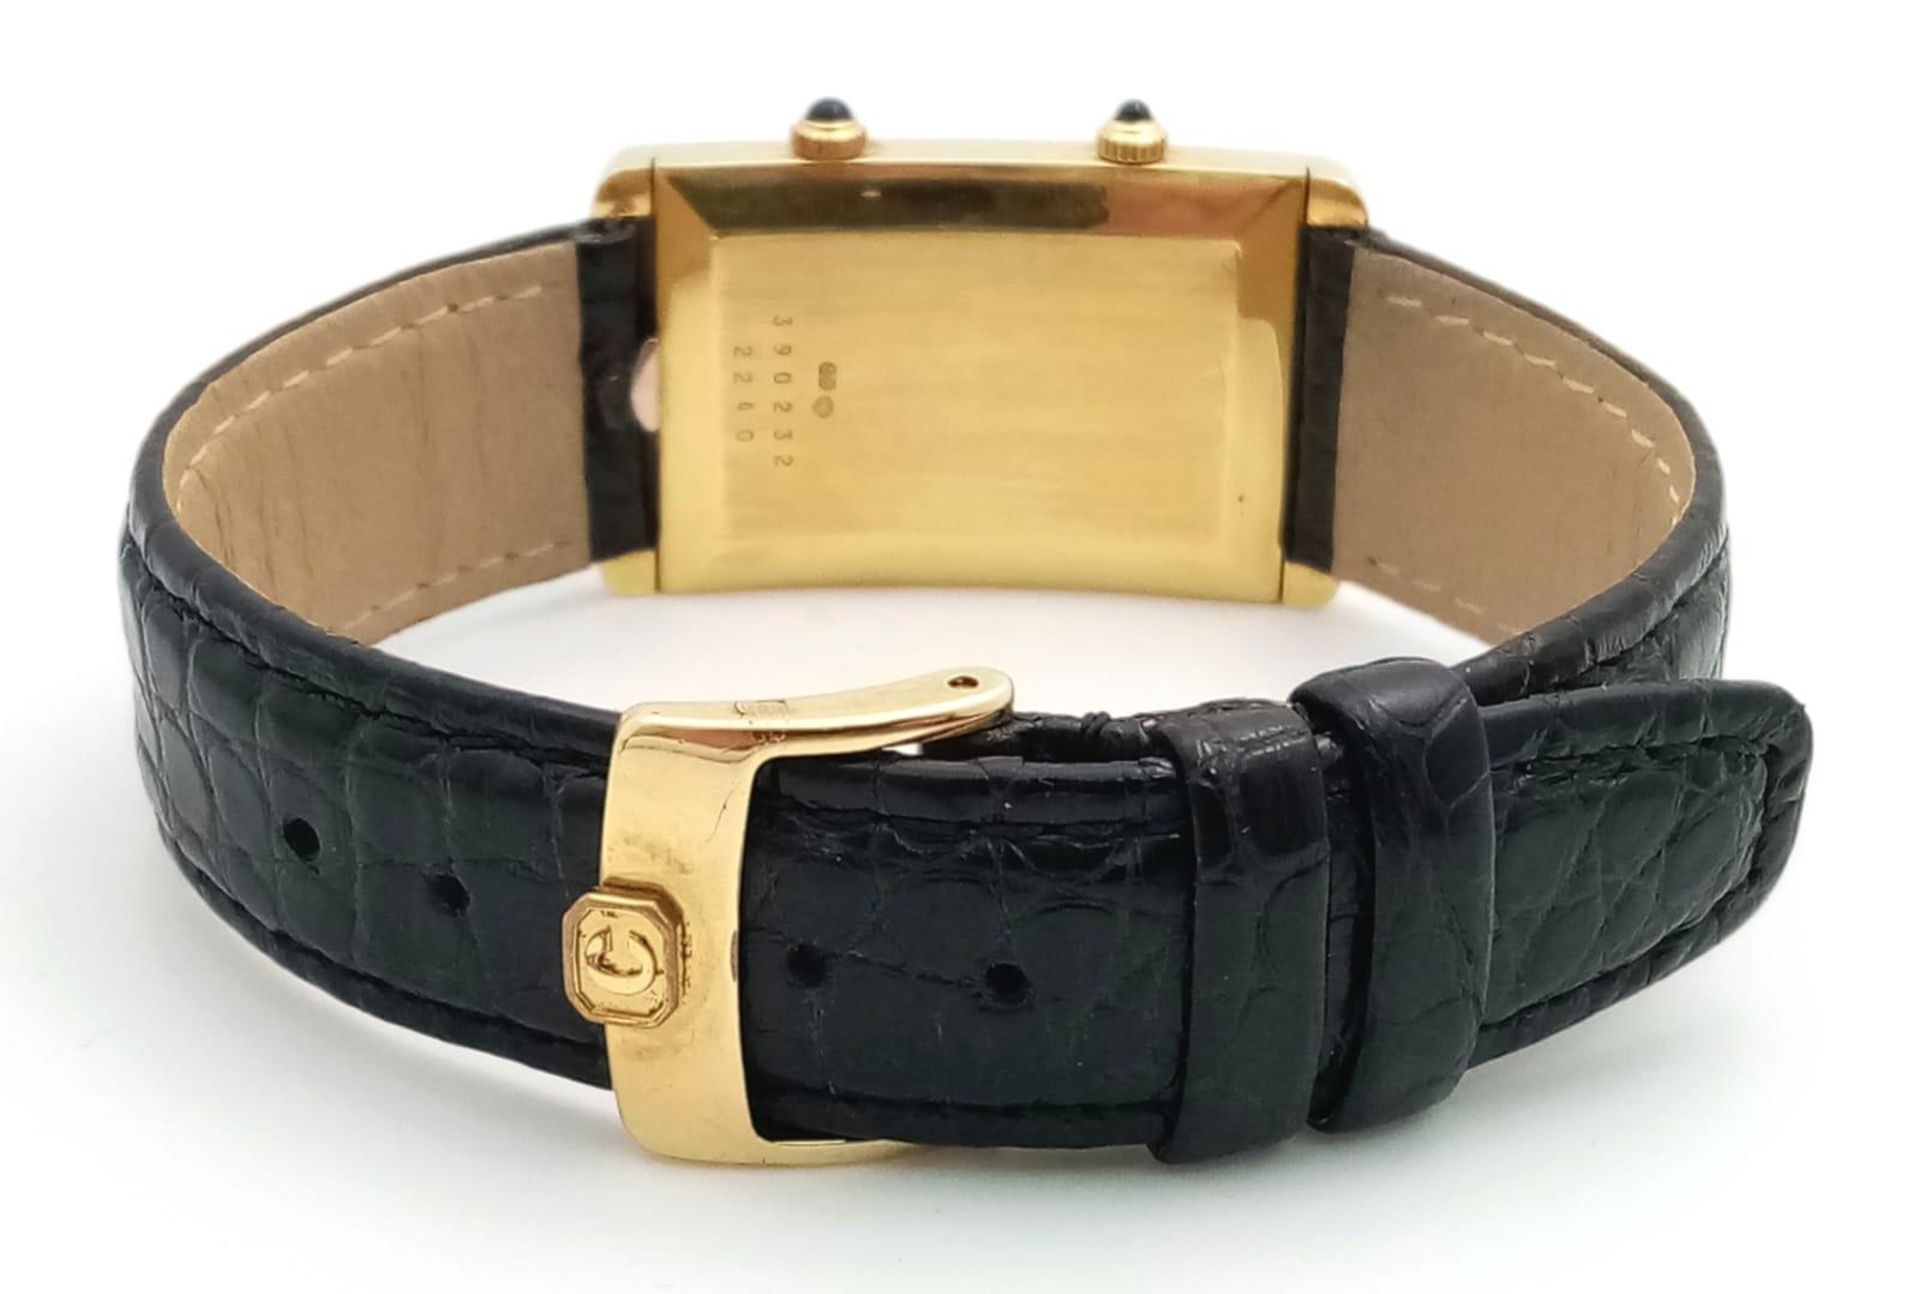 A Chopard 18K Gold Home Time (Dual Time) Gents Watch. Black leather strap. 18K gold rectangular case - Image 12 of 15